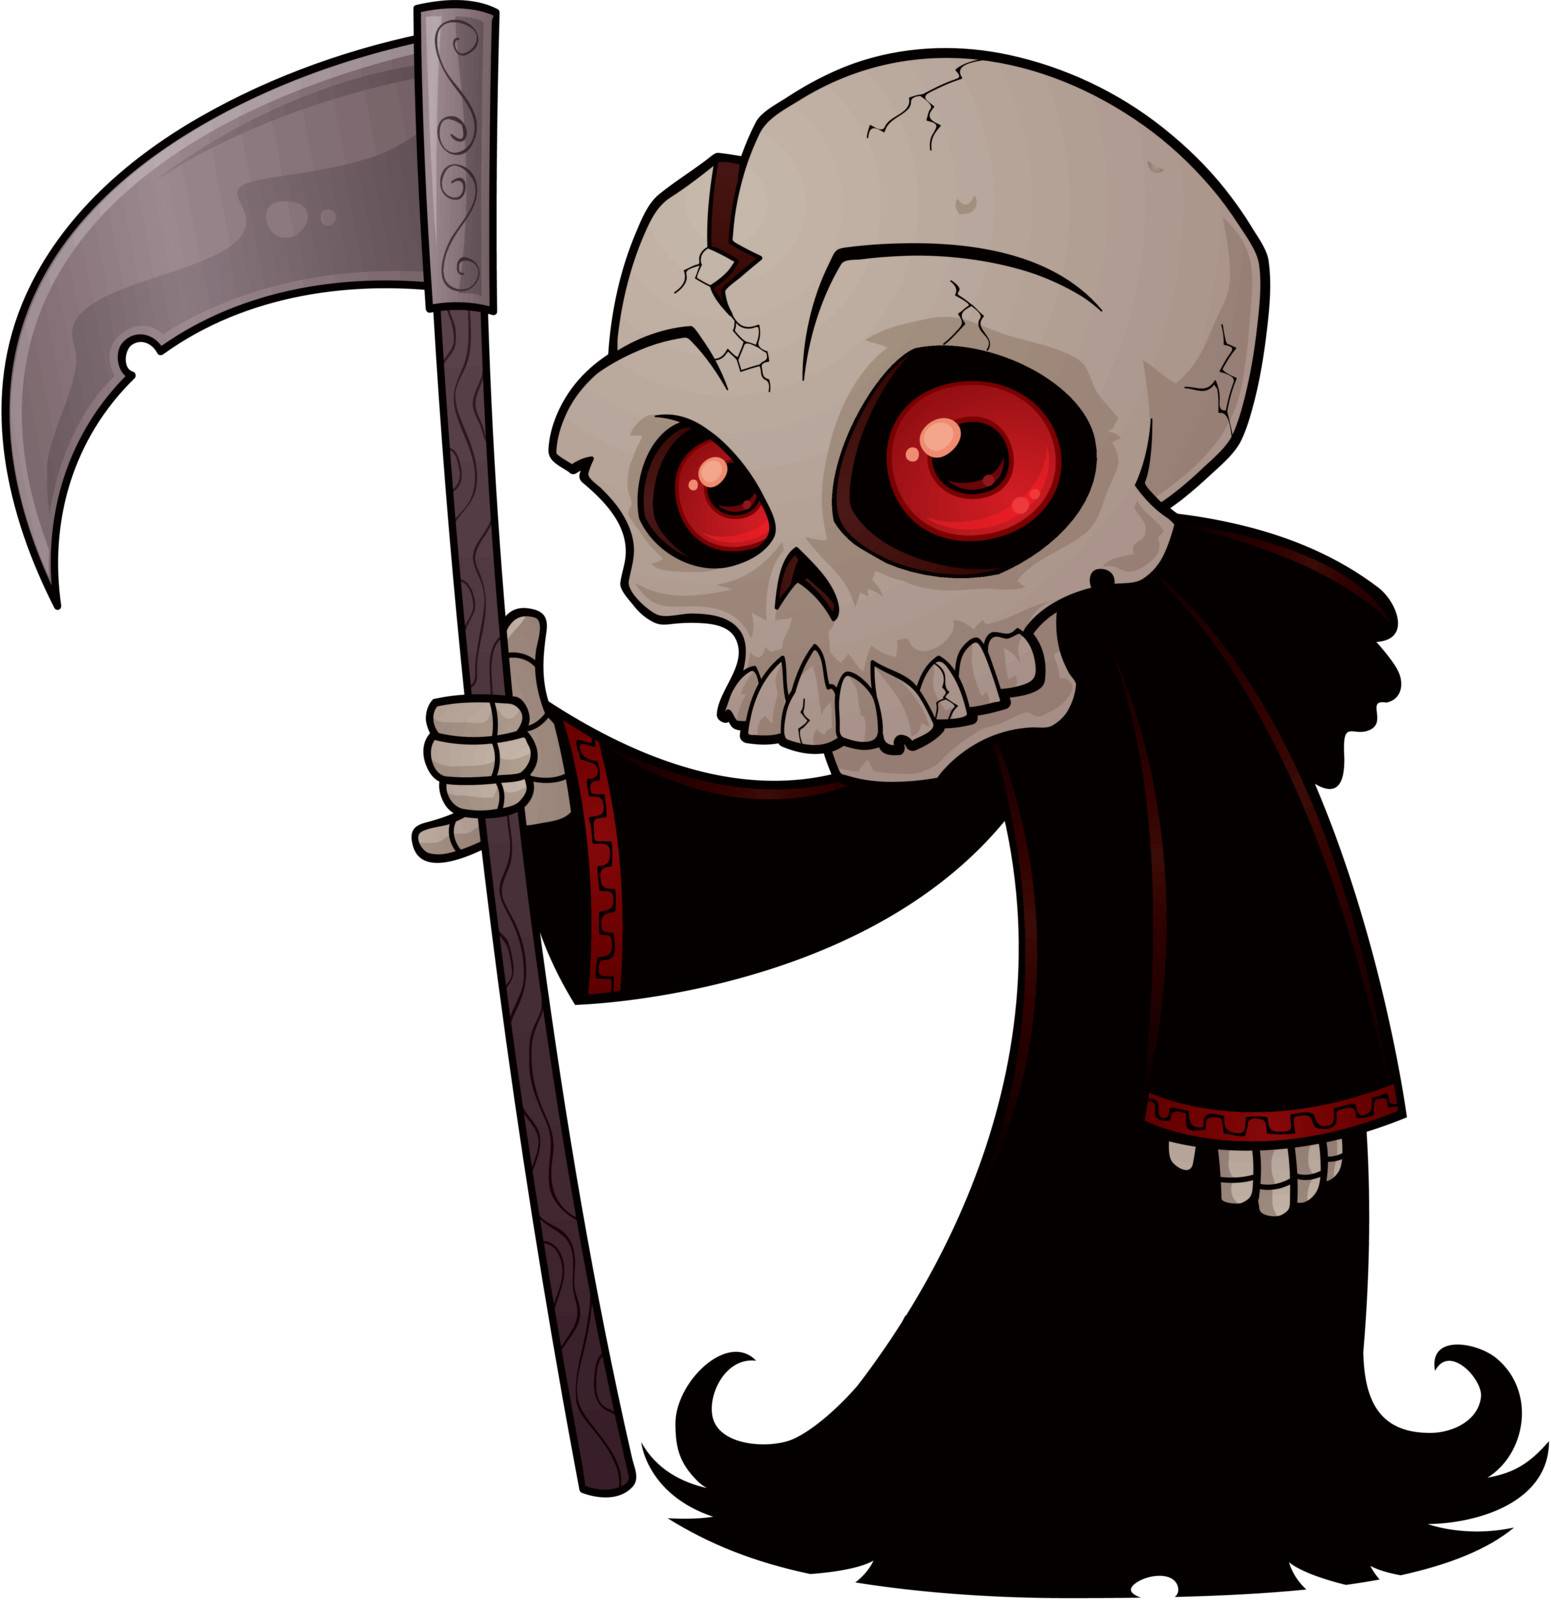 Vector cartoon illustration of a little Grim Reaper with red eyes holding a scythe.